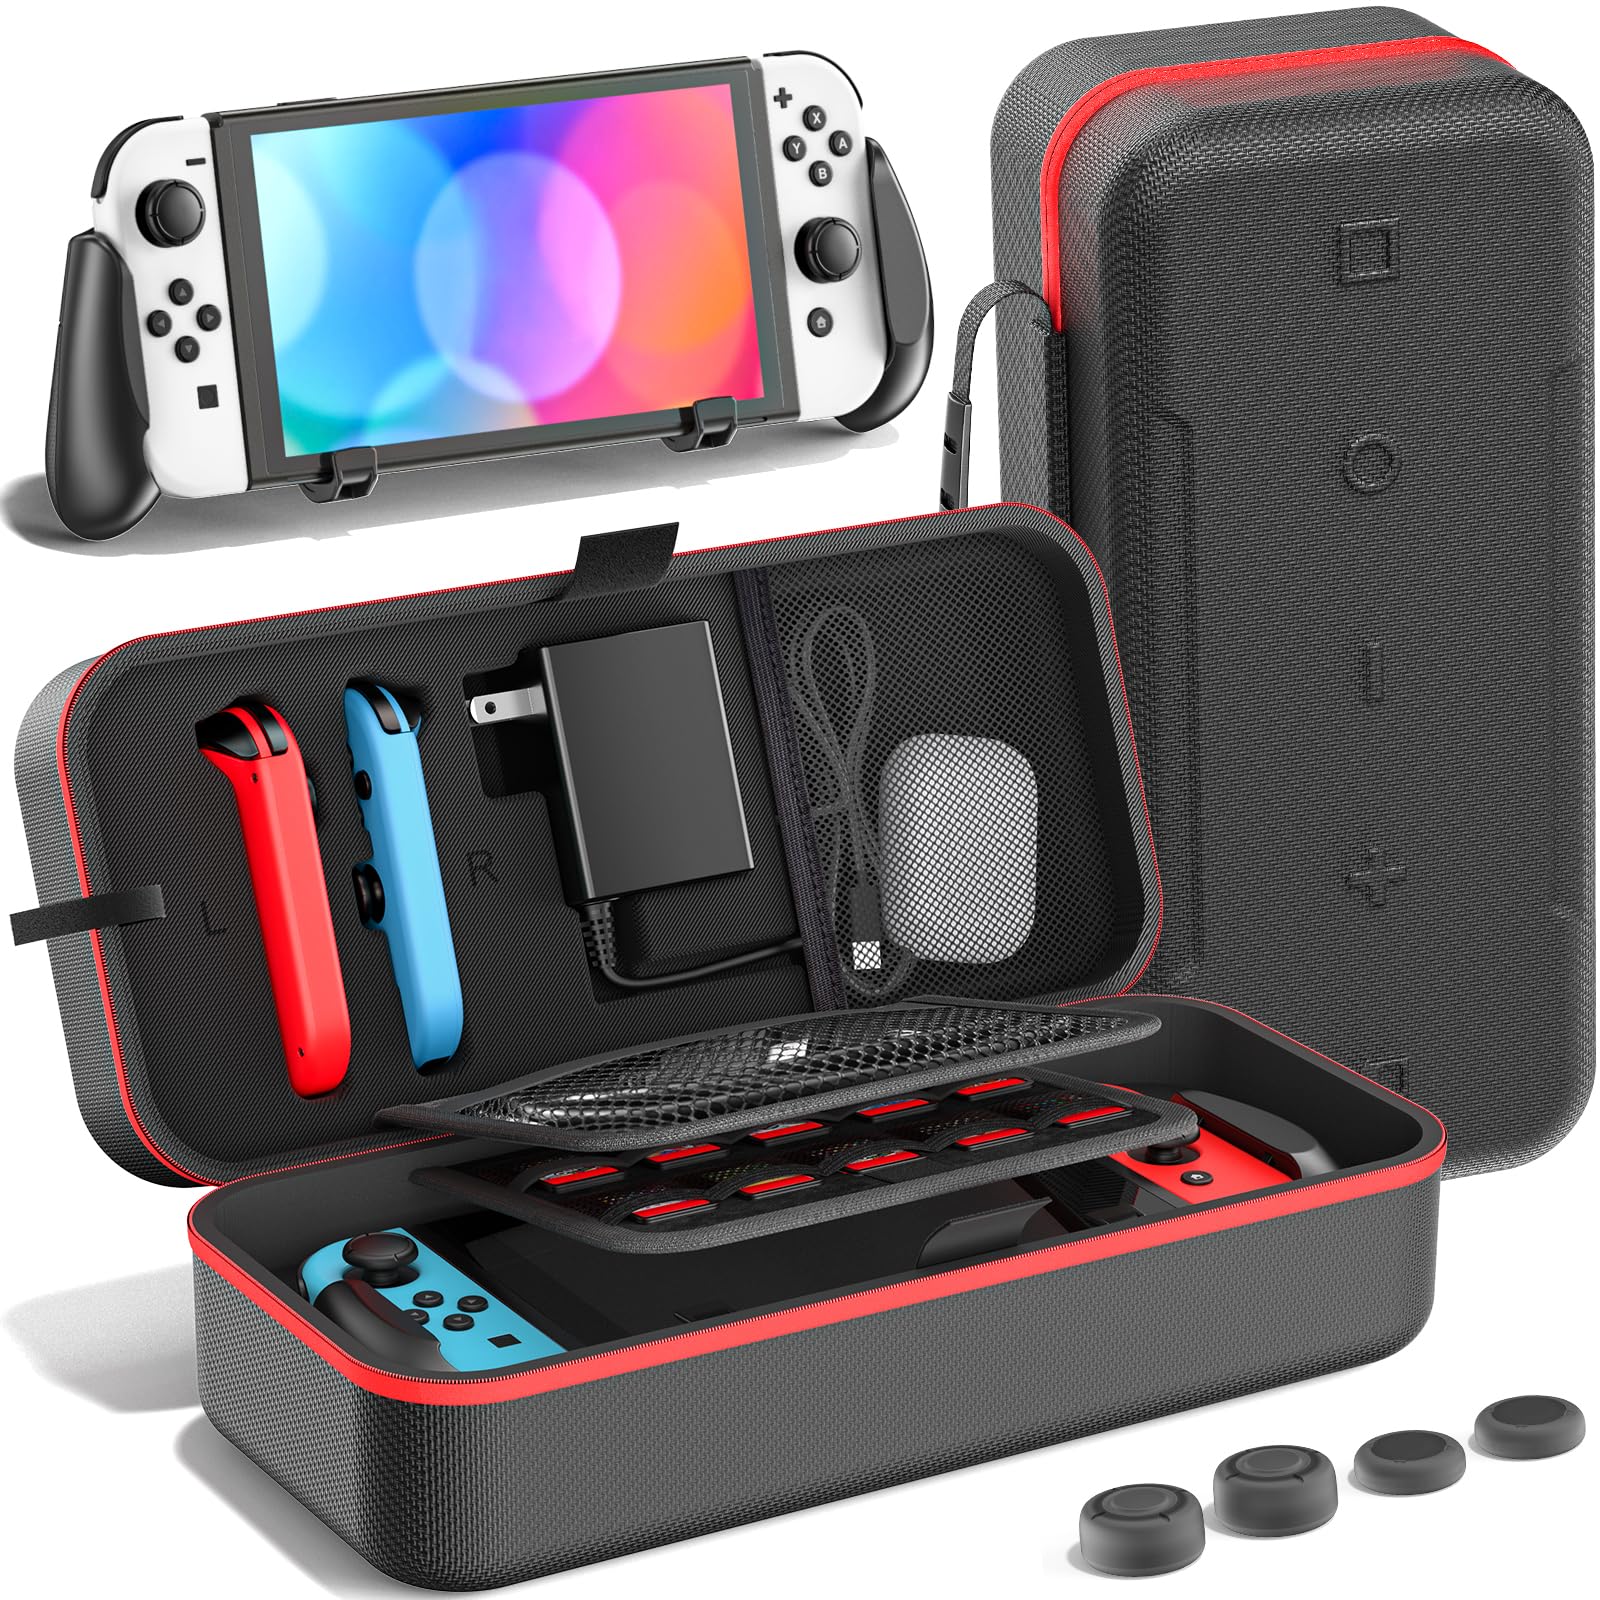 Switch Carry Case & Switch Handheld Grip Bundle Kits, Travel Carrying Case for Switch OLED & Original Switch, Portable Switch OLED Case with AC Adapter Slot & 20 Game Card Slots